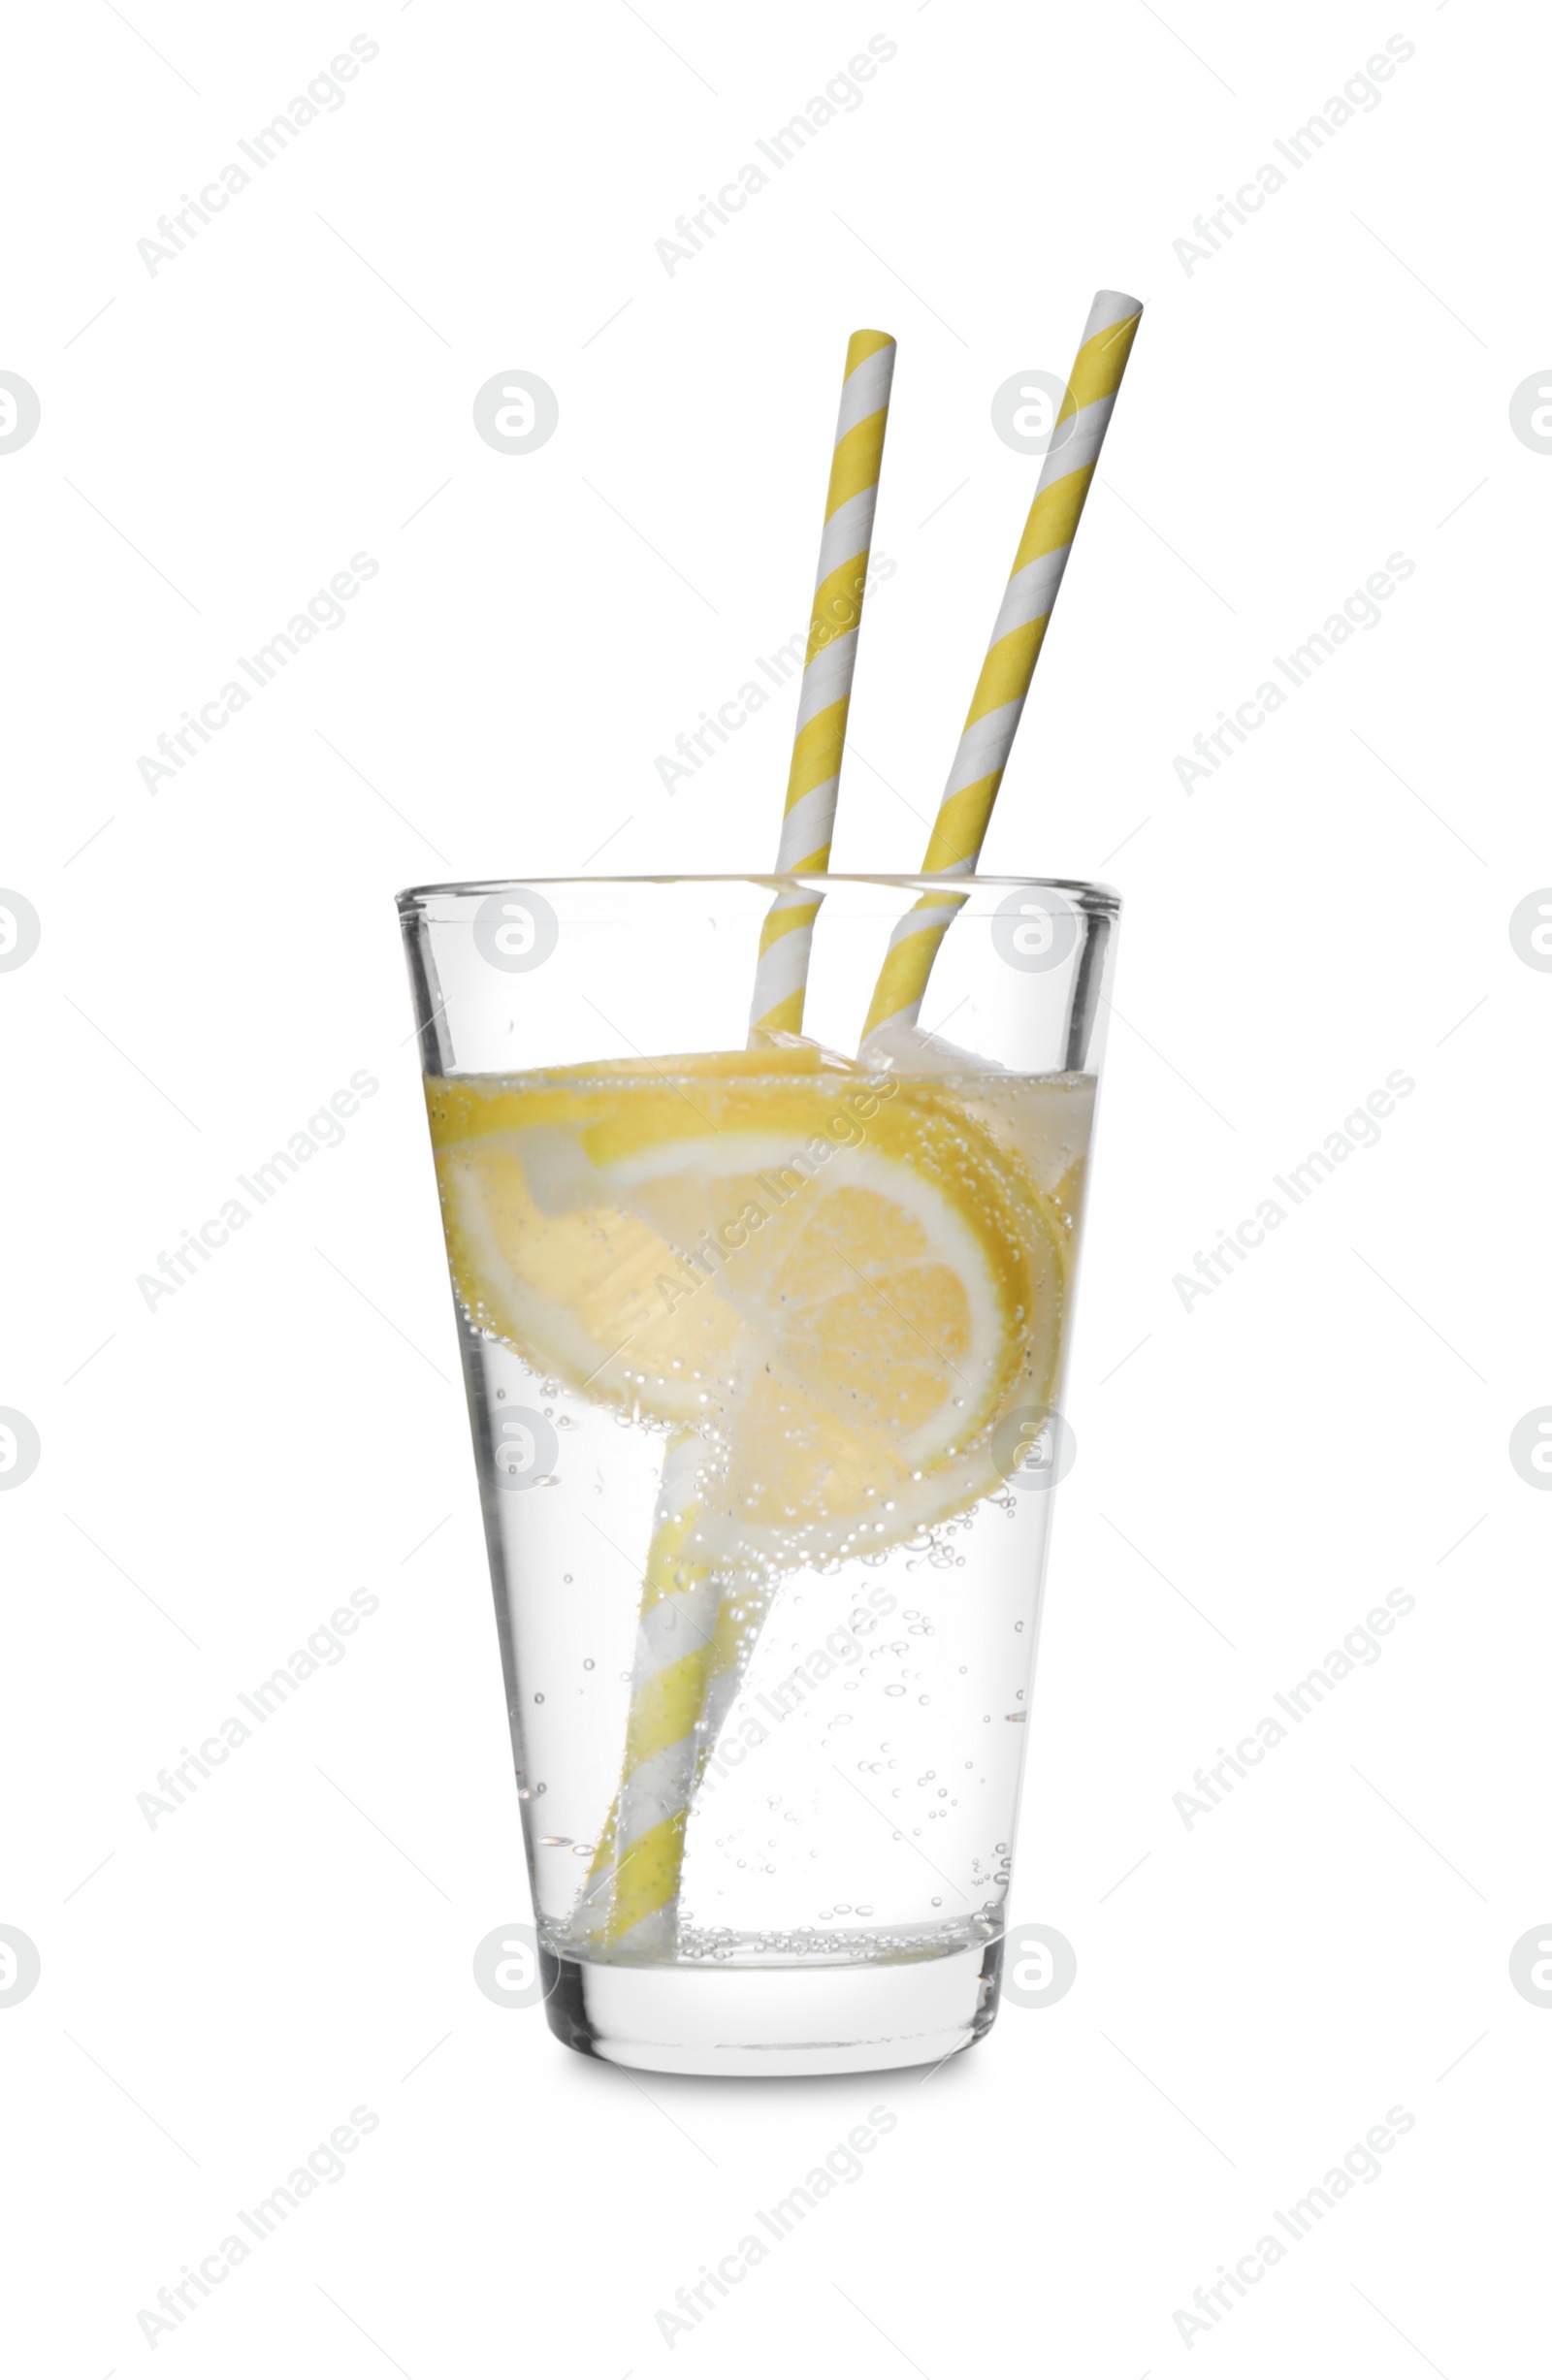 Photo of Soda water with lemon slices and straws isolated on white